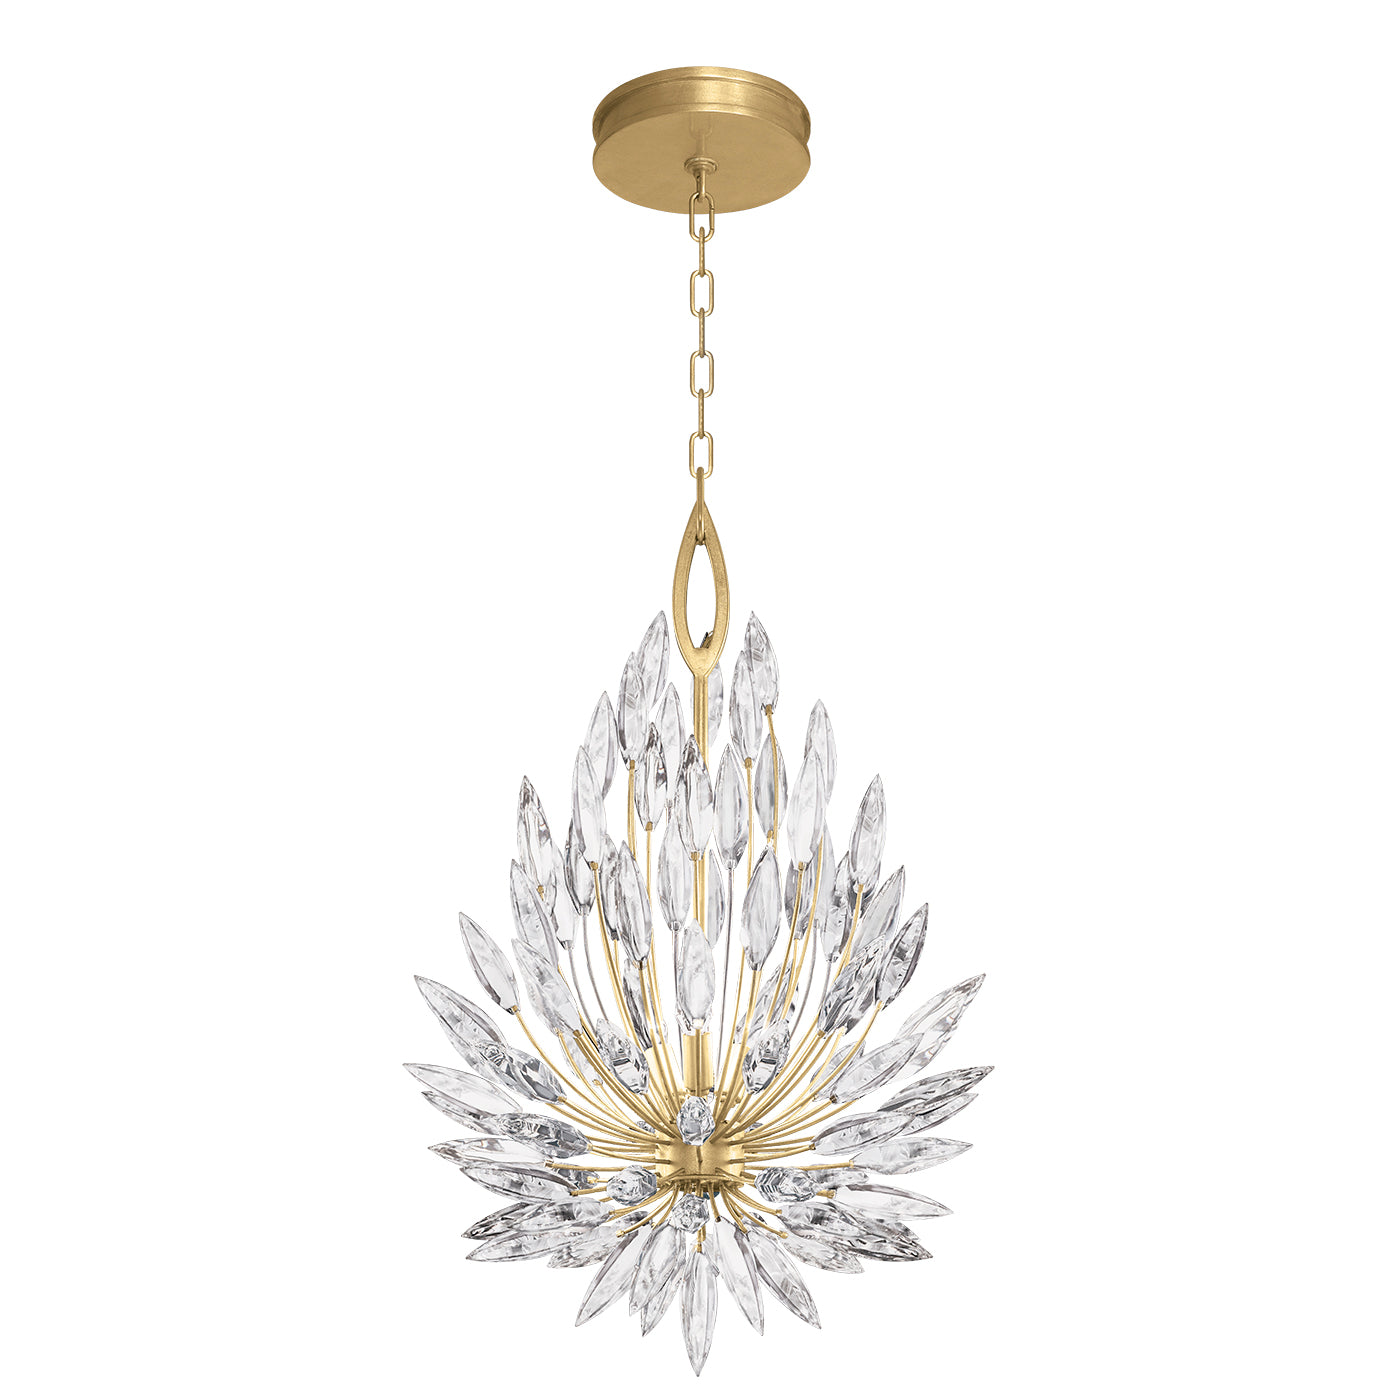 Fine Art Handcrafted Lighting Lily Buds Pendant Chandeliers Fine Art Handcrafted Lighting Gold 19 x 32.5 